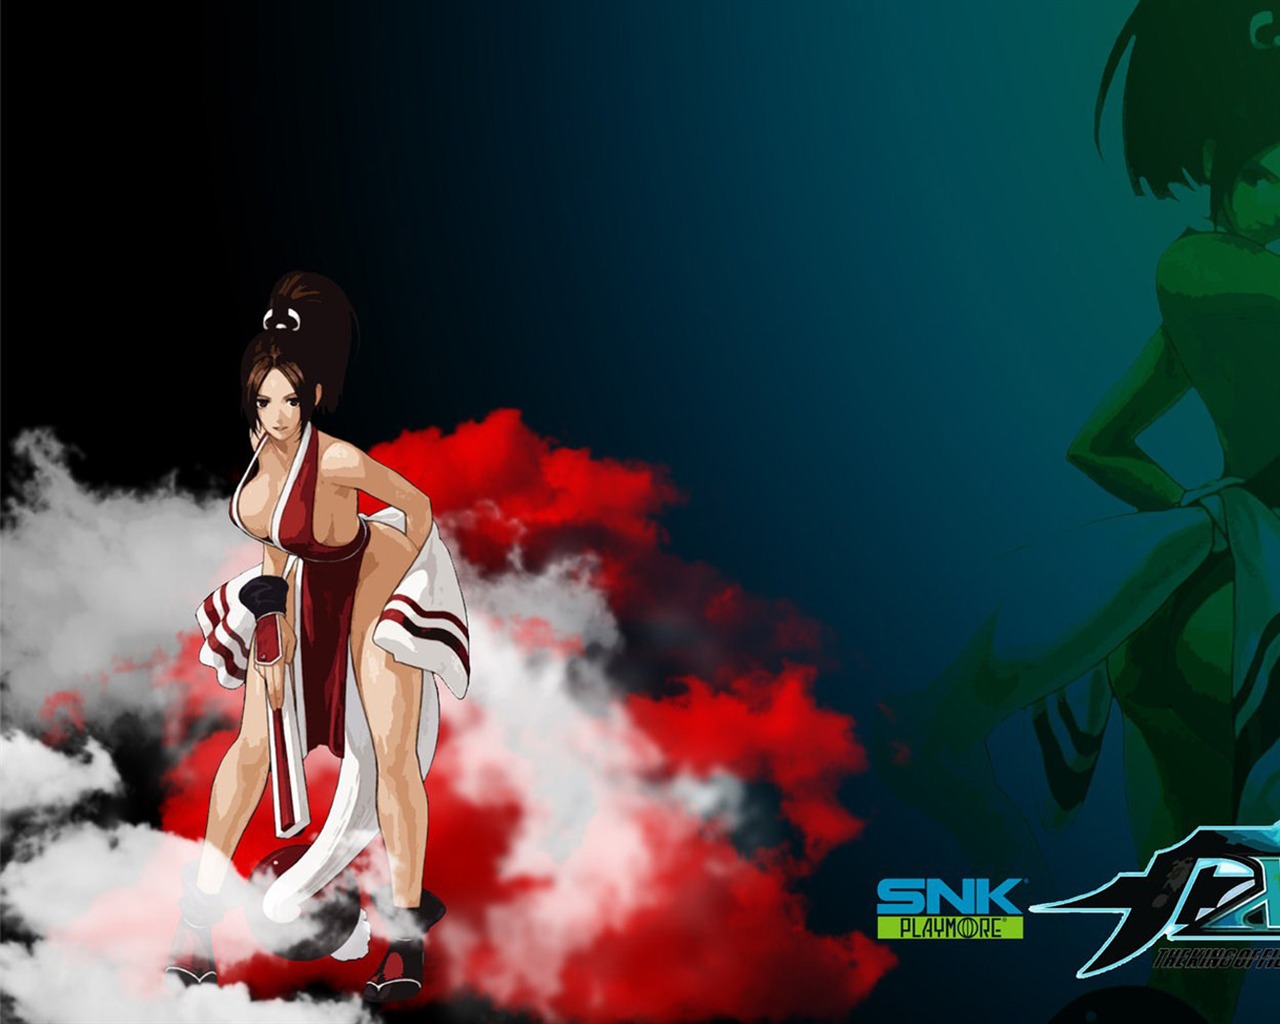 The King of Fighters XIII 拳皇13 壁紙專輯 #16 - 1280x1024